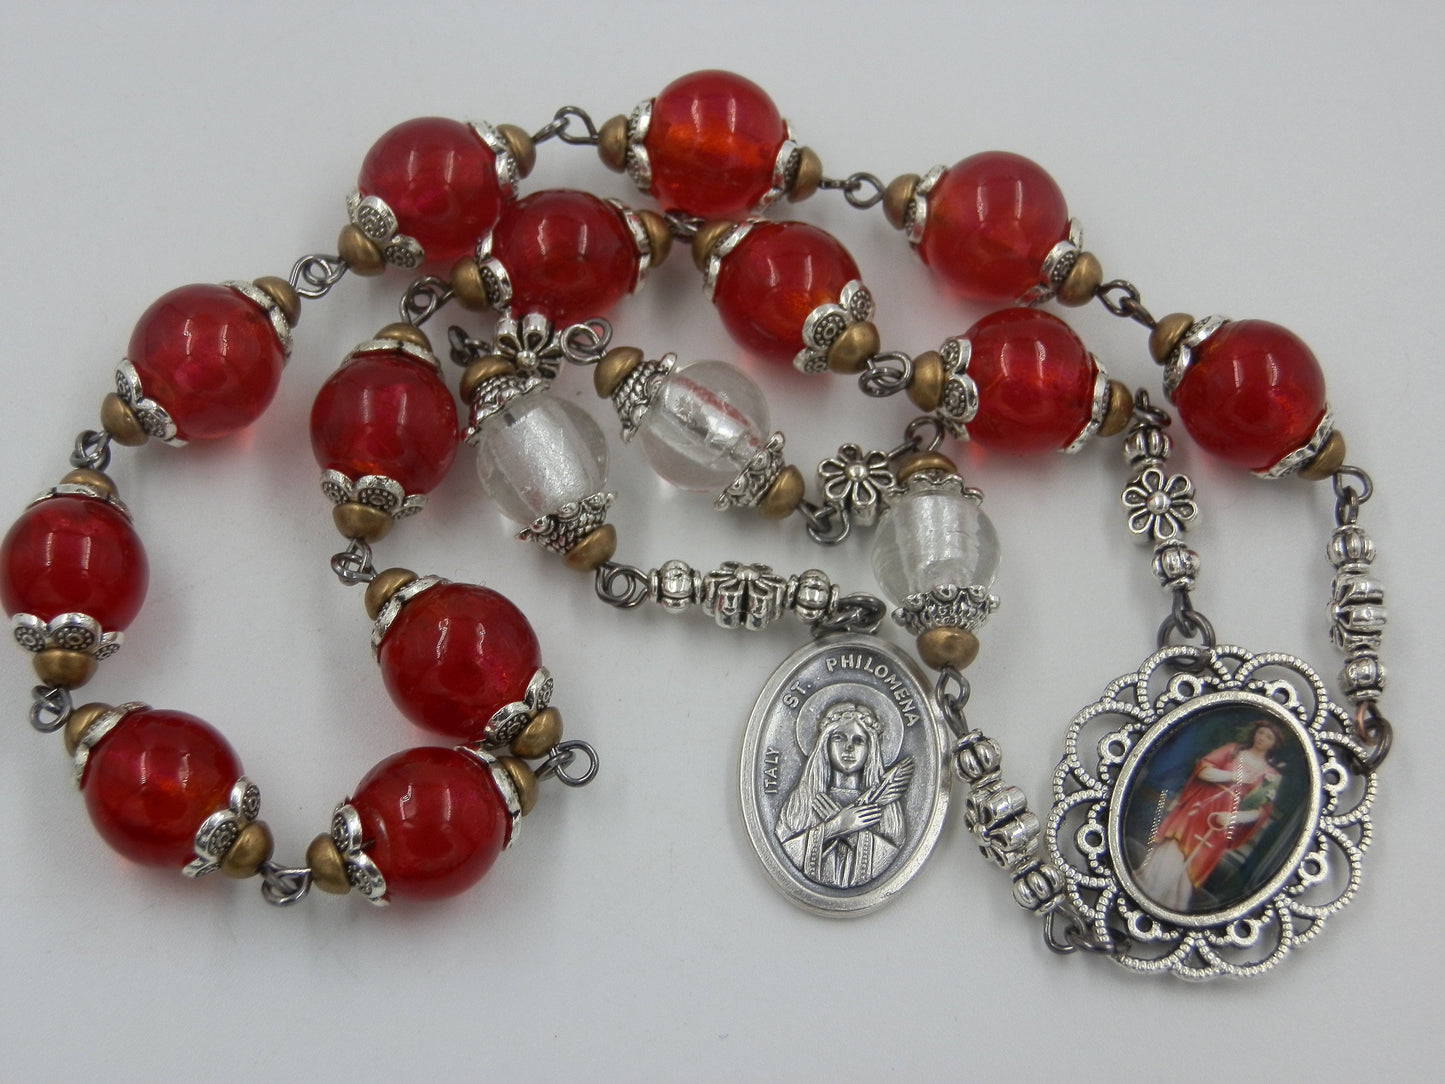 Large Heirloom St. Philomena prayer Chaplet, Religious prayer beads, chaplet prayer beads, Patron Saint of Children and lost causes.